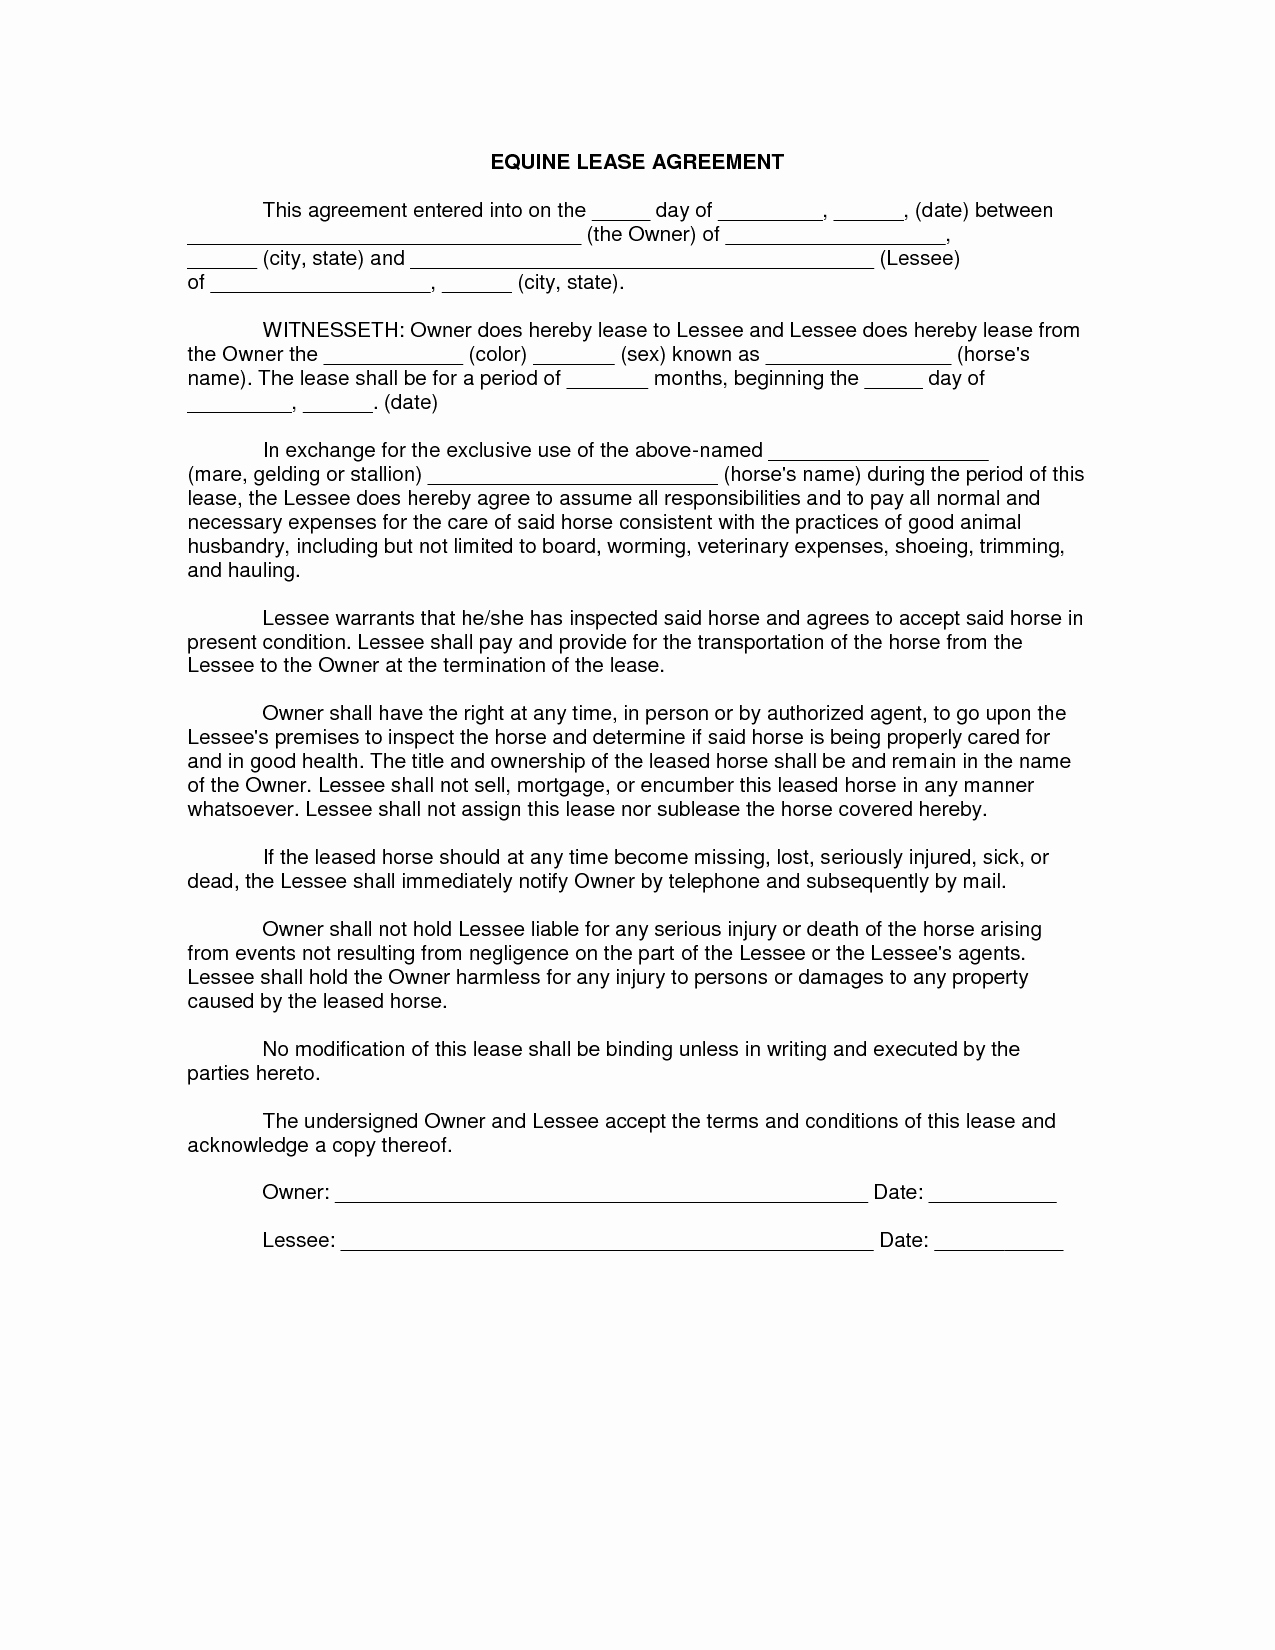 Horse Lease Agreements Templates